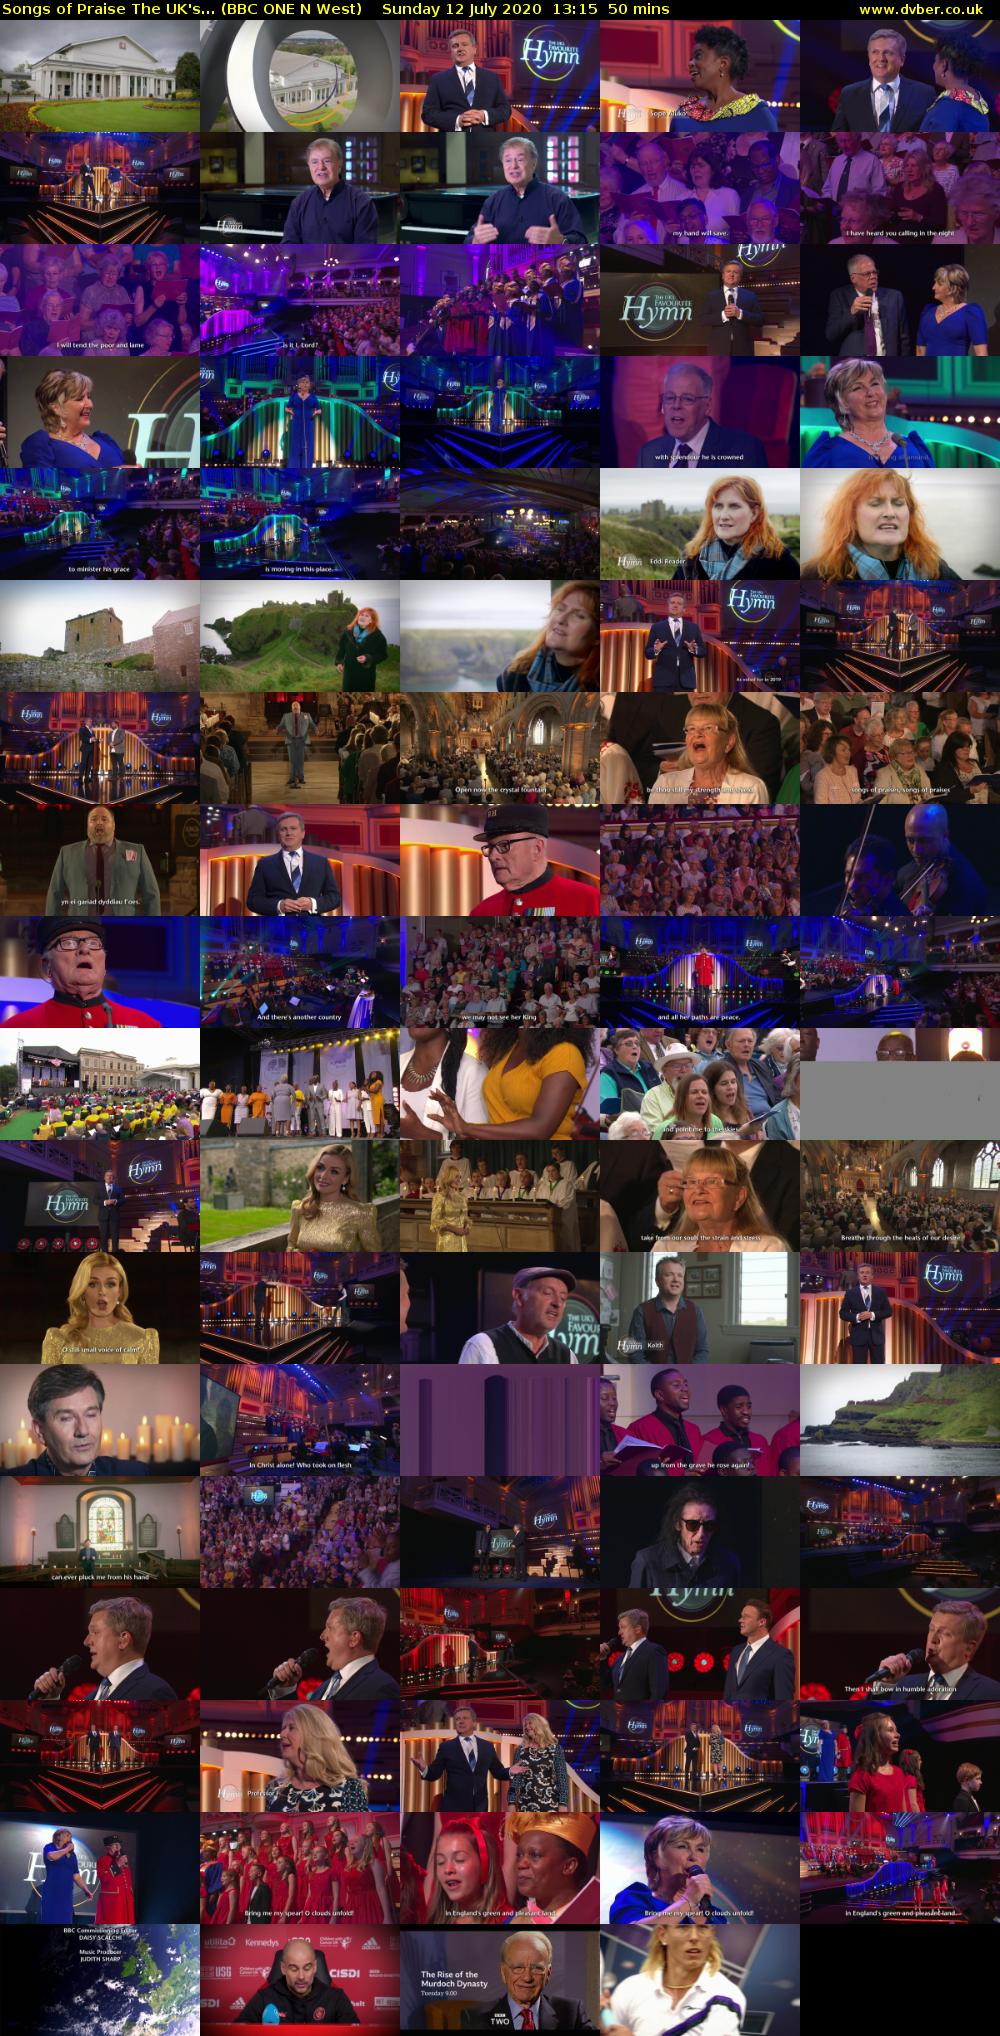 Songs of Praise The UK's... (BBC ONE N West) Sunday 12 July 2020 13:15 - 14:05